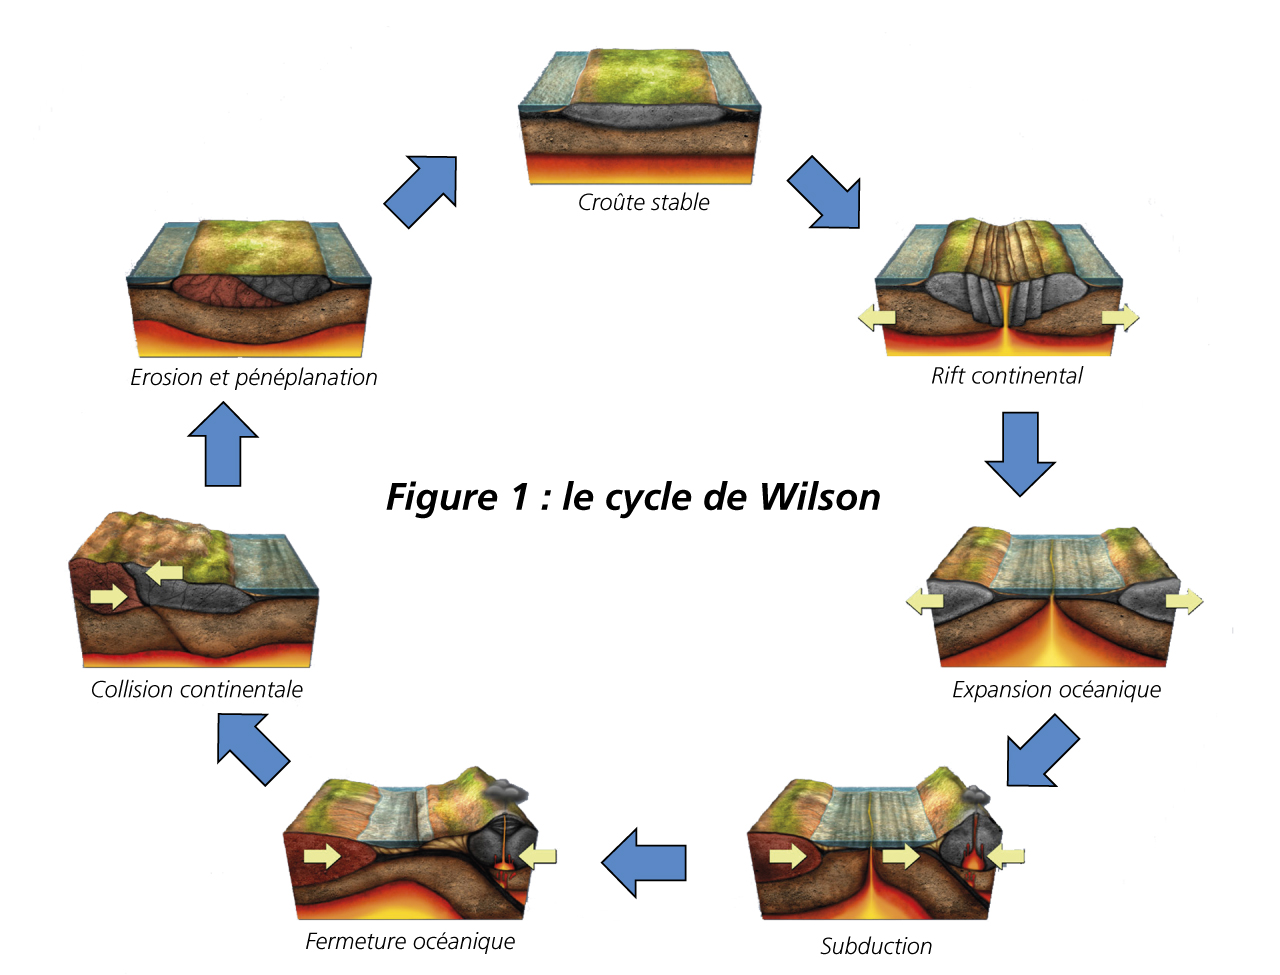 Figure 1: Wilson cycle Stable crust / Continental rift / Oceanic expansion / Subduction / Oceanic closure / Continental collision / Erosion and peneplanation